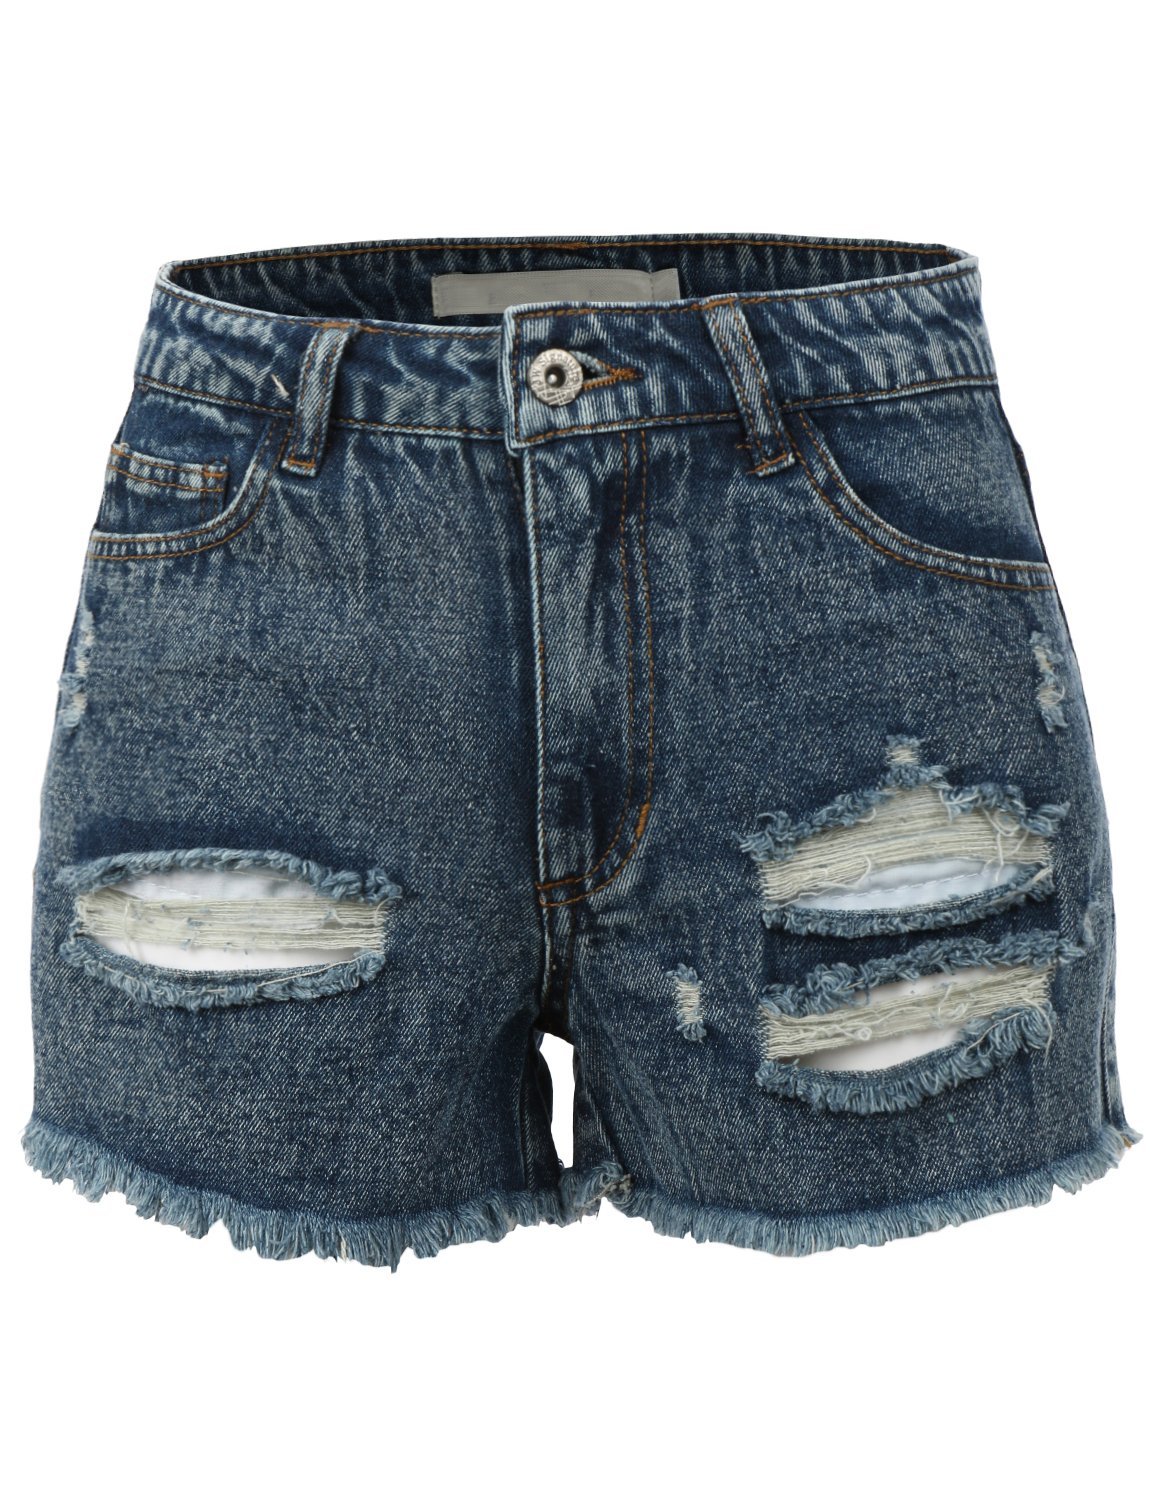 RubyK Womens Casual High Waisted Distressed Destroyed Cut Off Denim Shorts